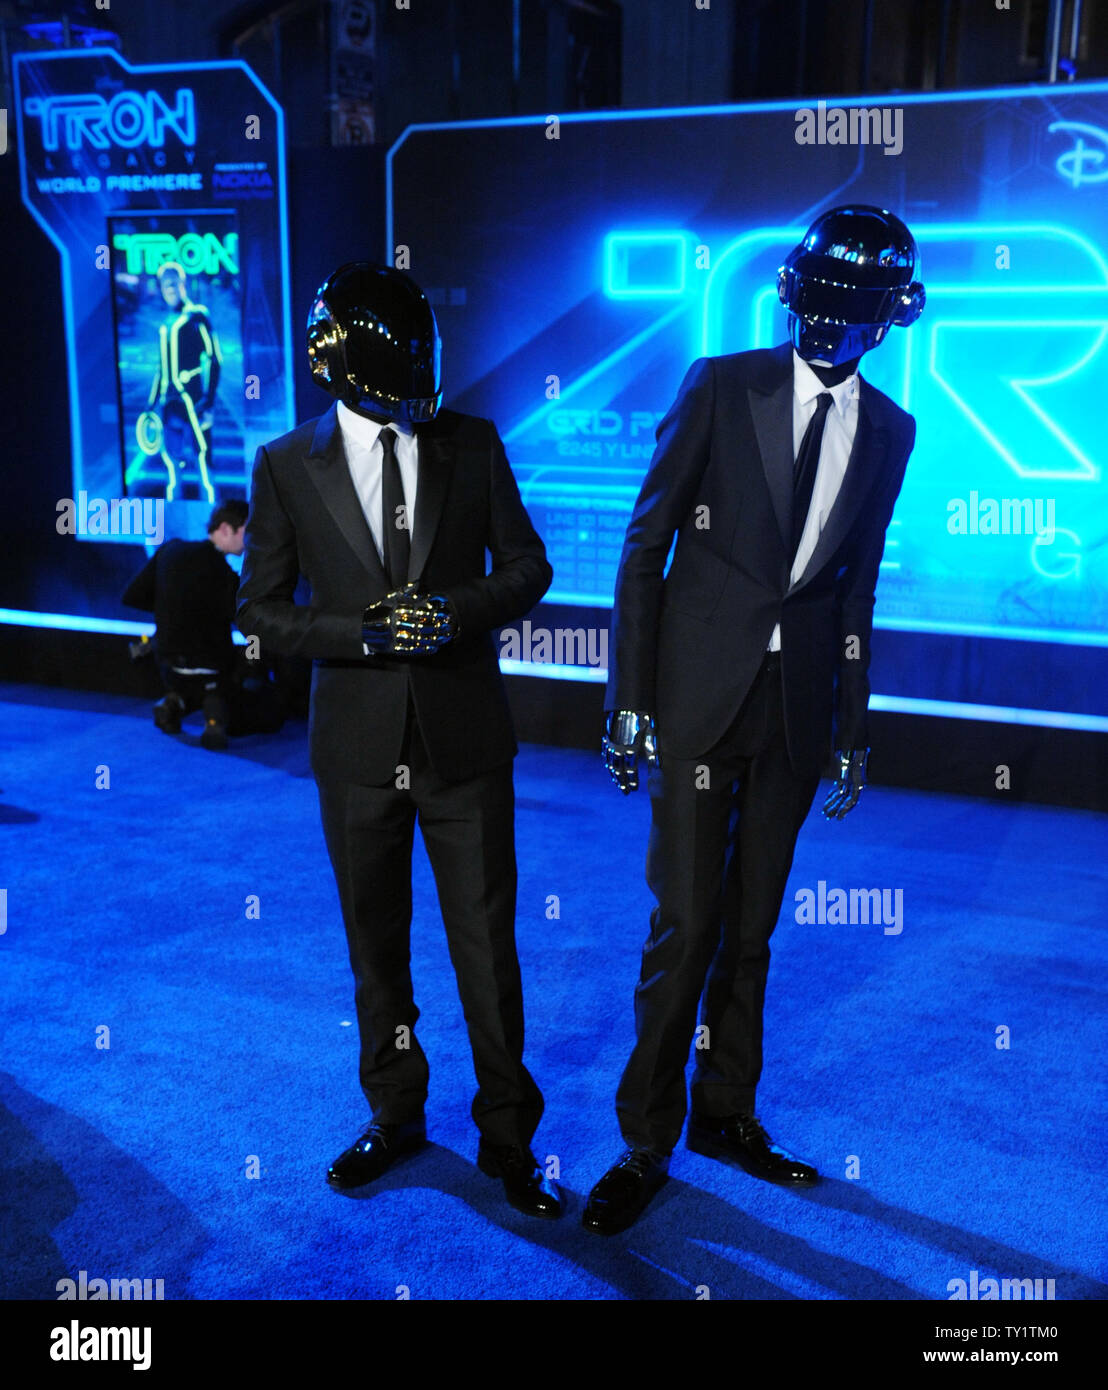 French electronical music duo Daft Punk members Thomas Bangalter and Guy-Manuel Homem-Christo, cast members in the motion picture sci-fi thriller 'TRON: Legacy', attend the world premiere of the film at the El Capitan Theatre in the Hollywood section of Los Angeles on December 11, 2010.  UPI/Jim Ruymen Stock Photo